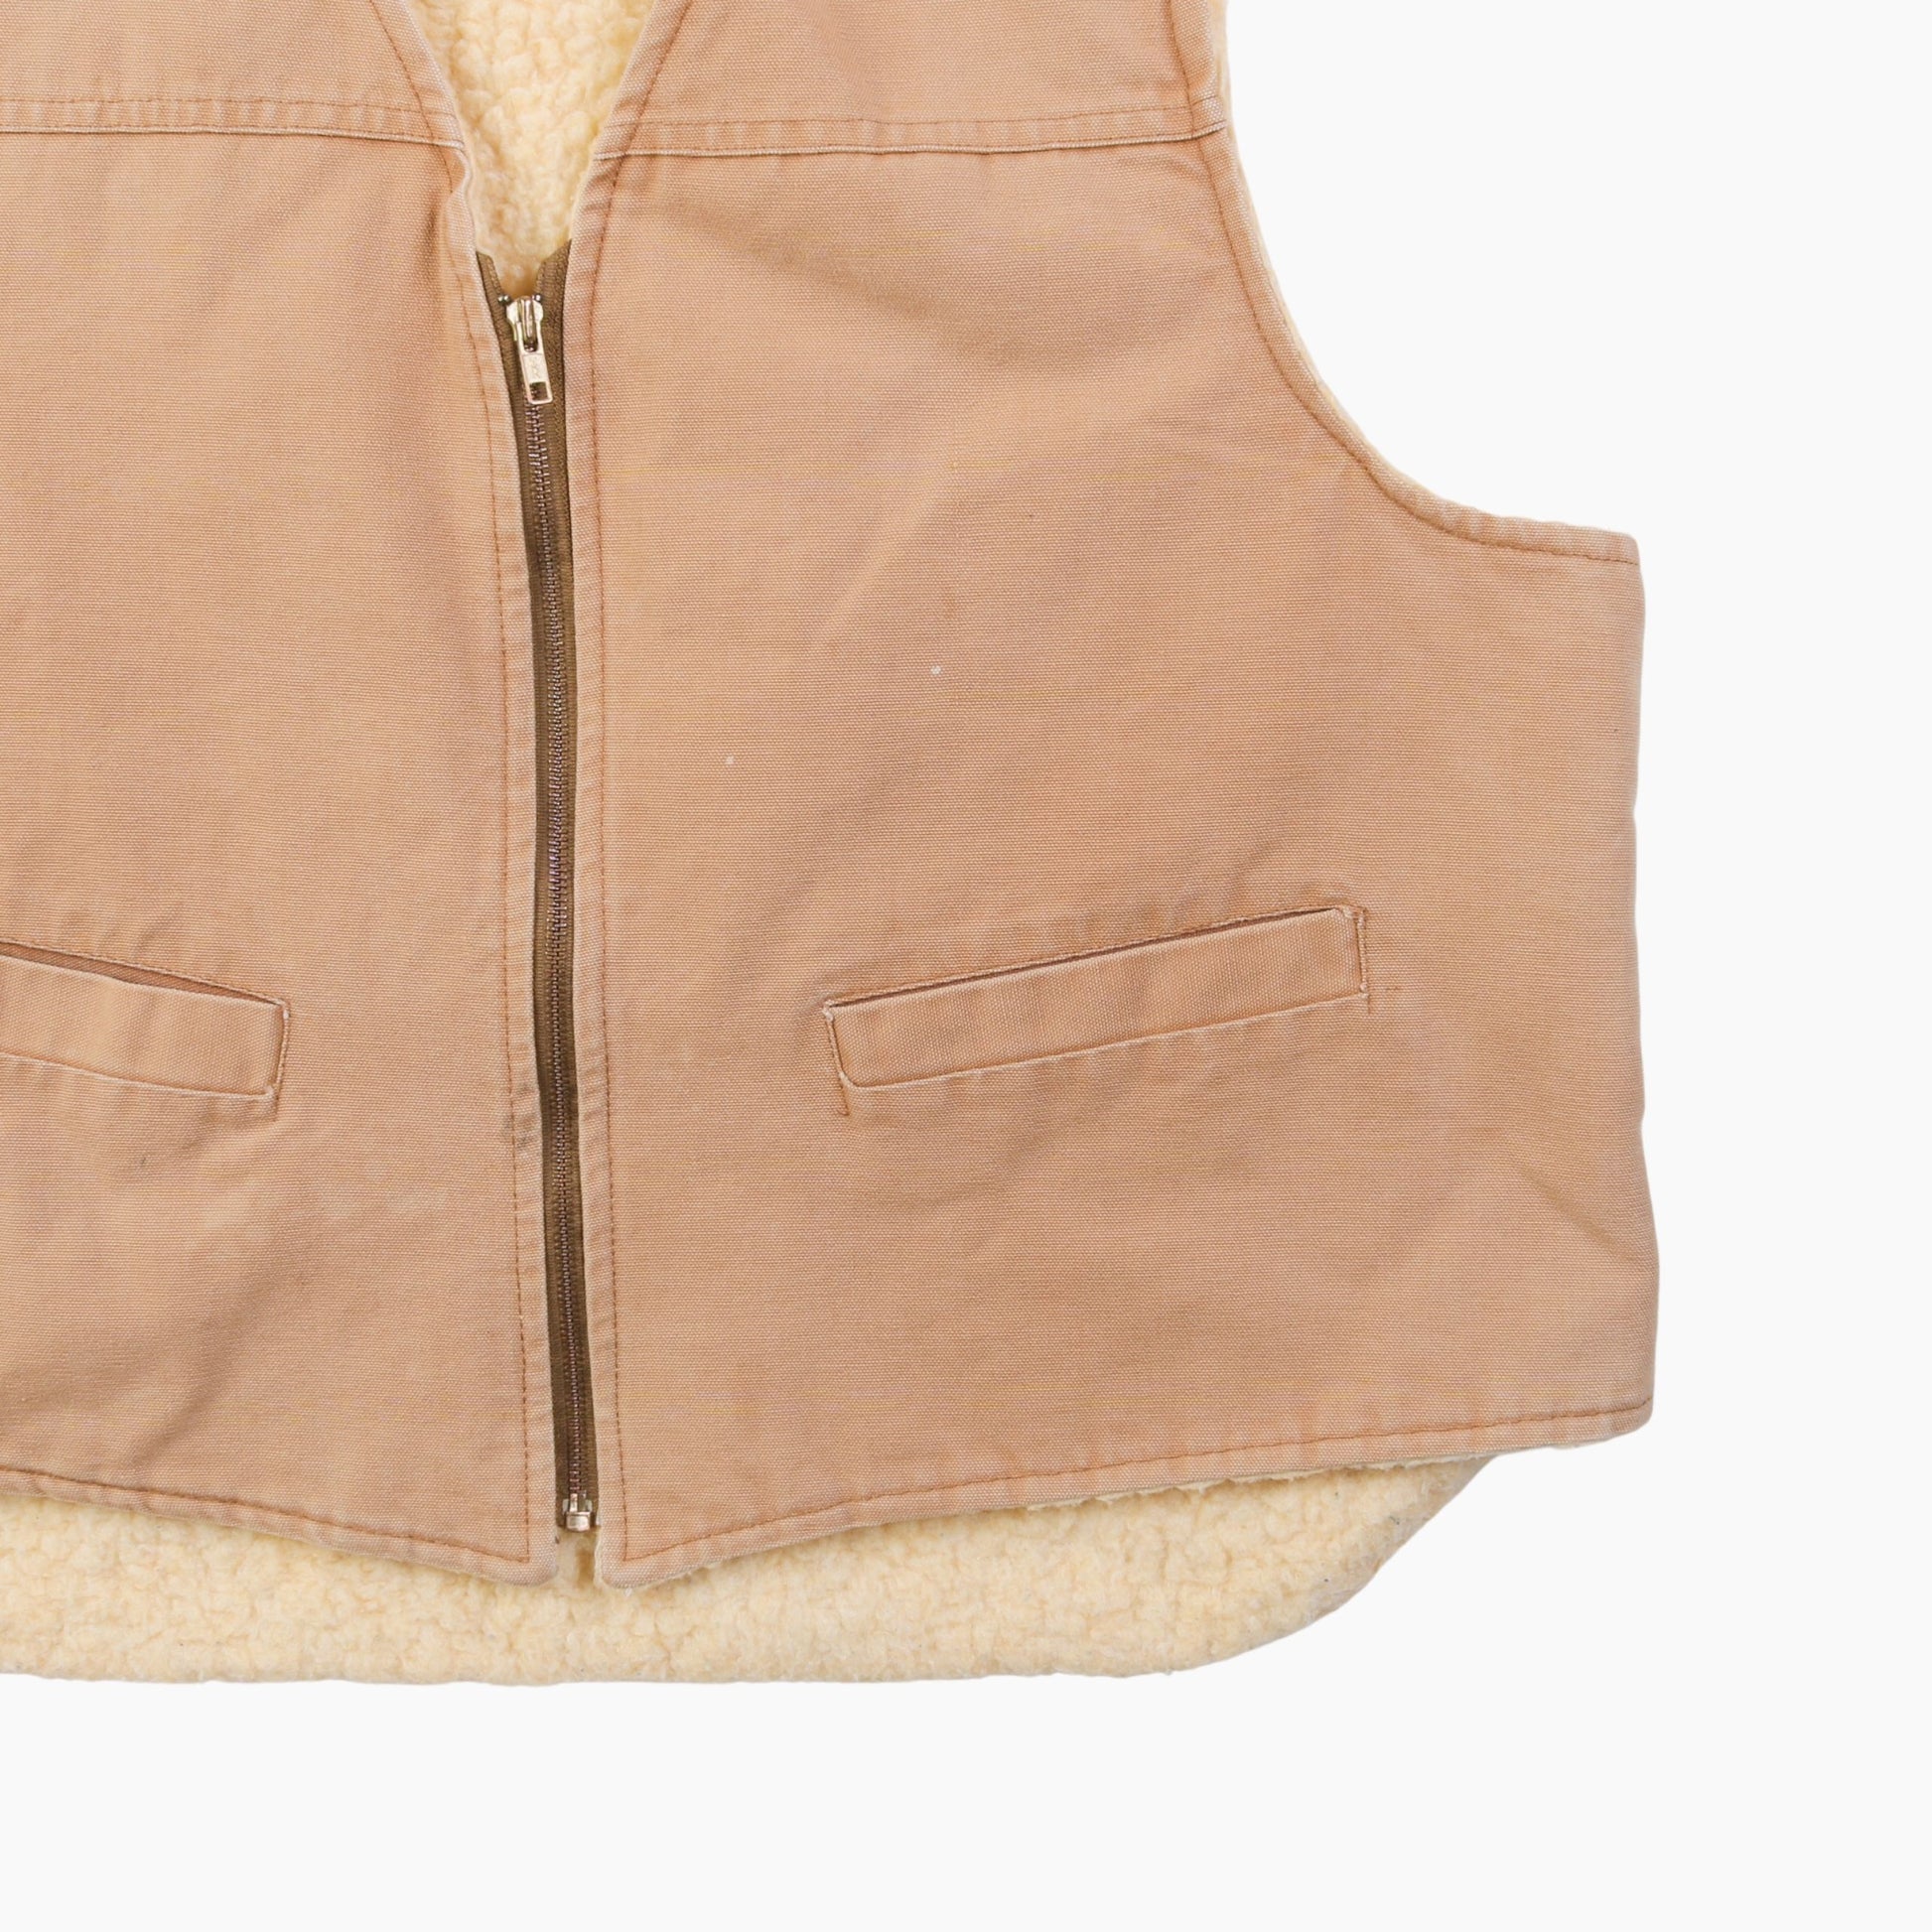 Lined Vest - Washed Sand - American Madness